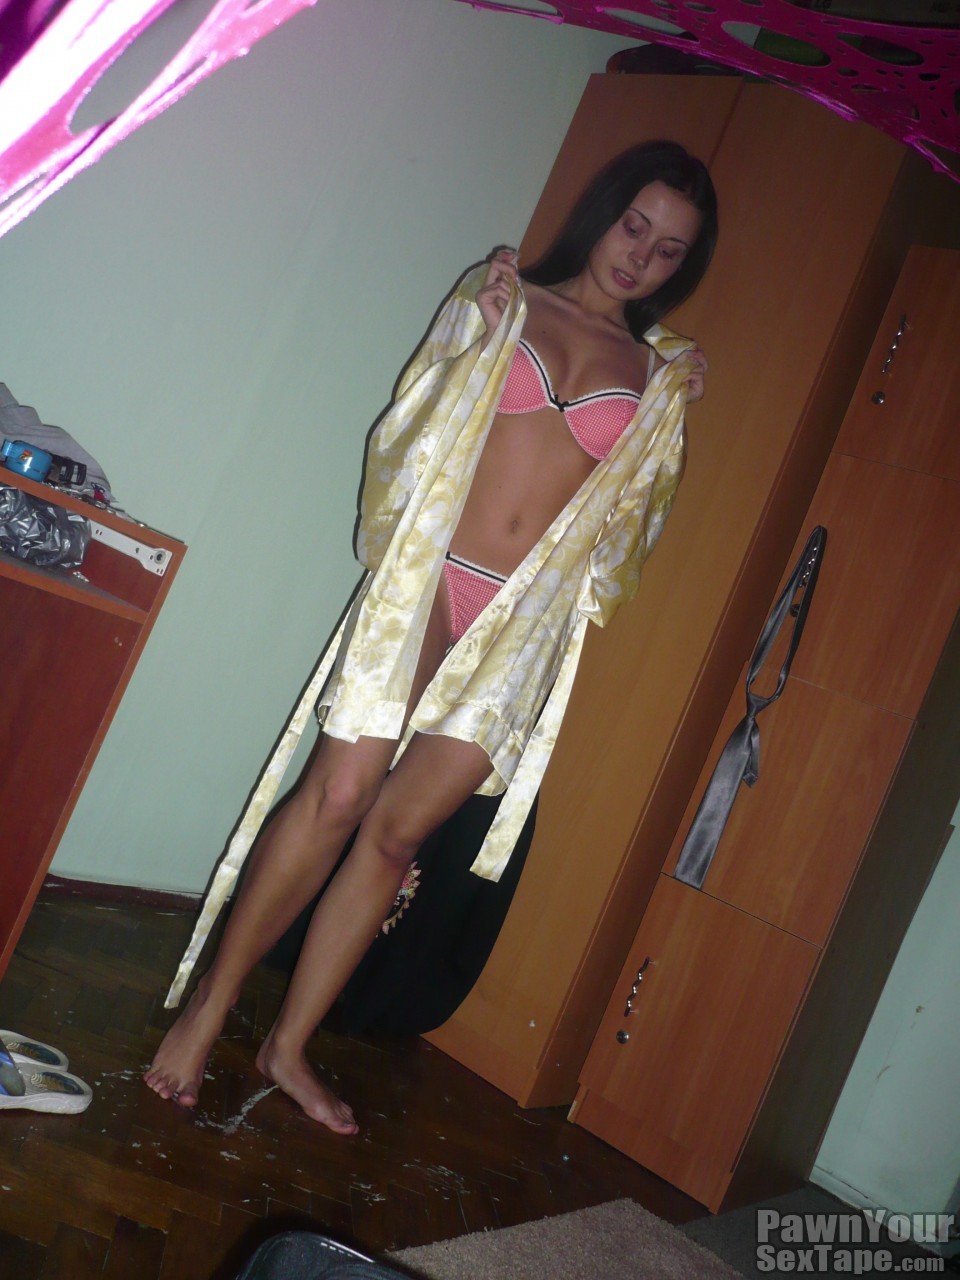 Cute 18 y.o. Sandra gets naked for her BF as he snaps hot naked home pics of her #79350812